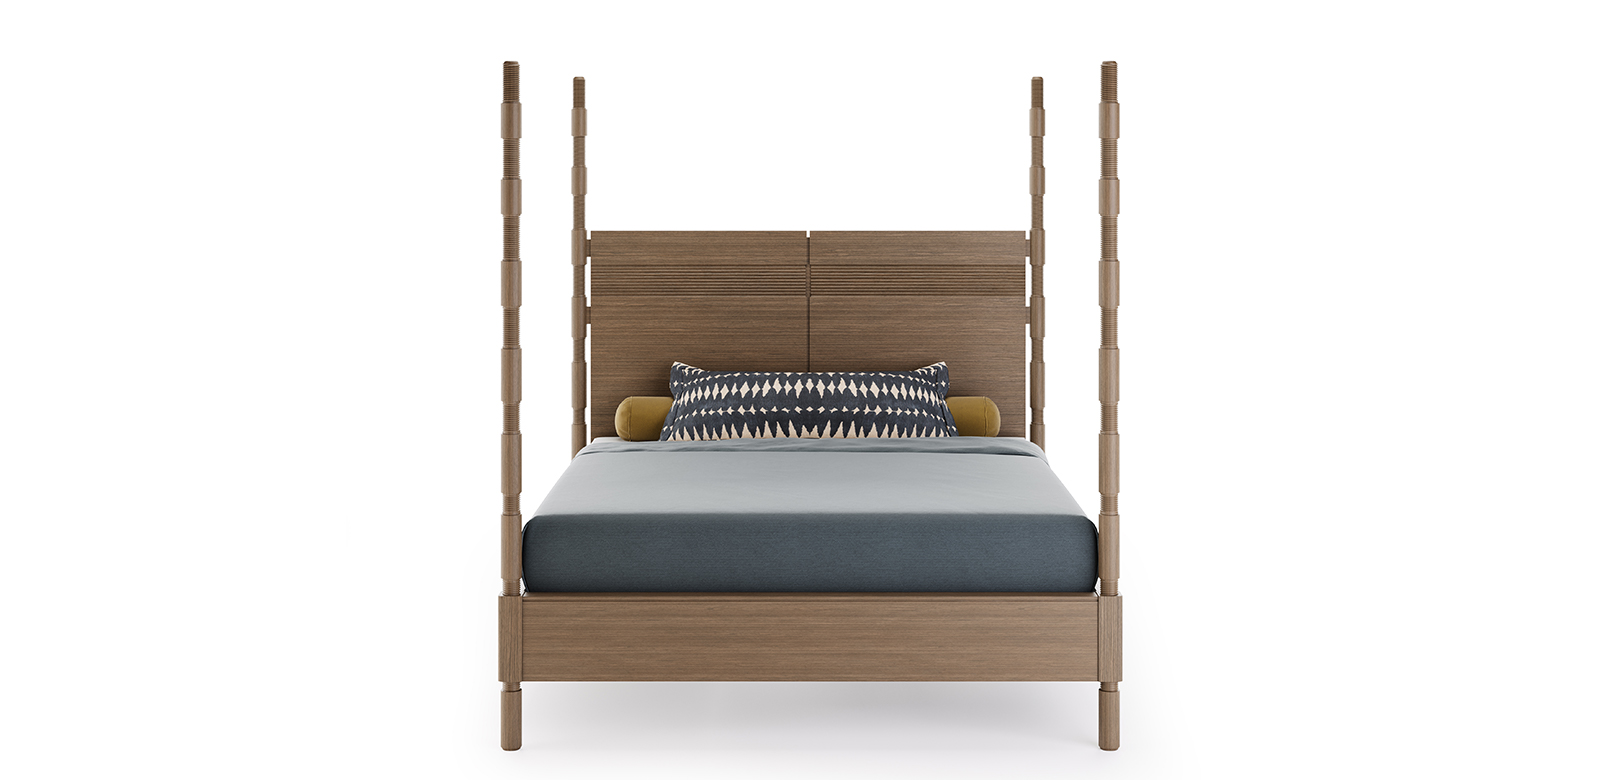 SS-Totem-Bed-05